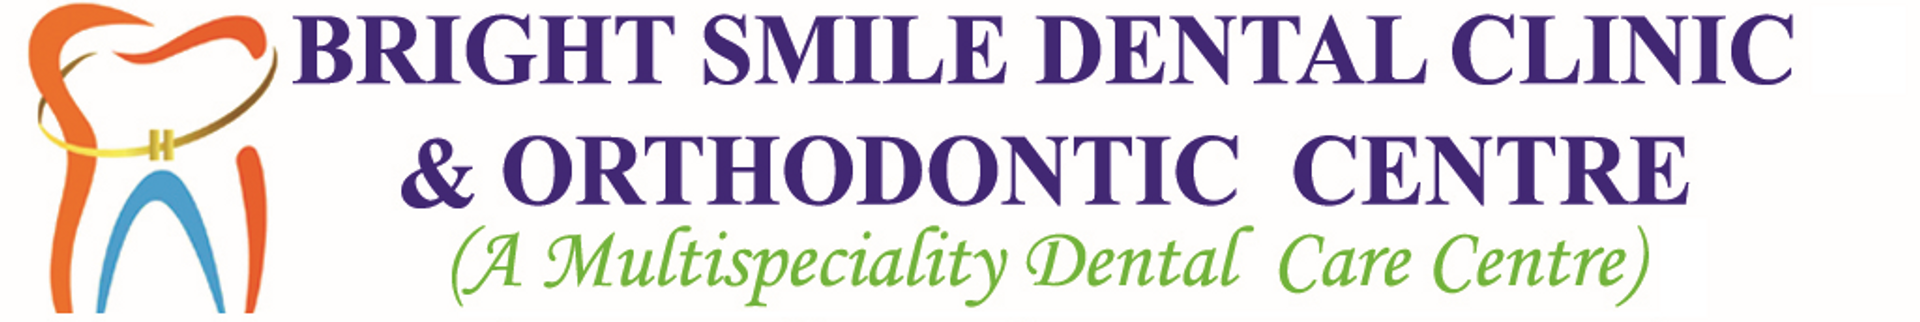 Bright Smile Dental Clinic Orthodontic and Implant Center - Logo